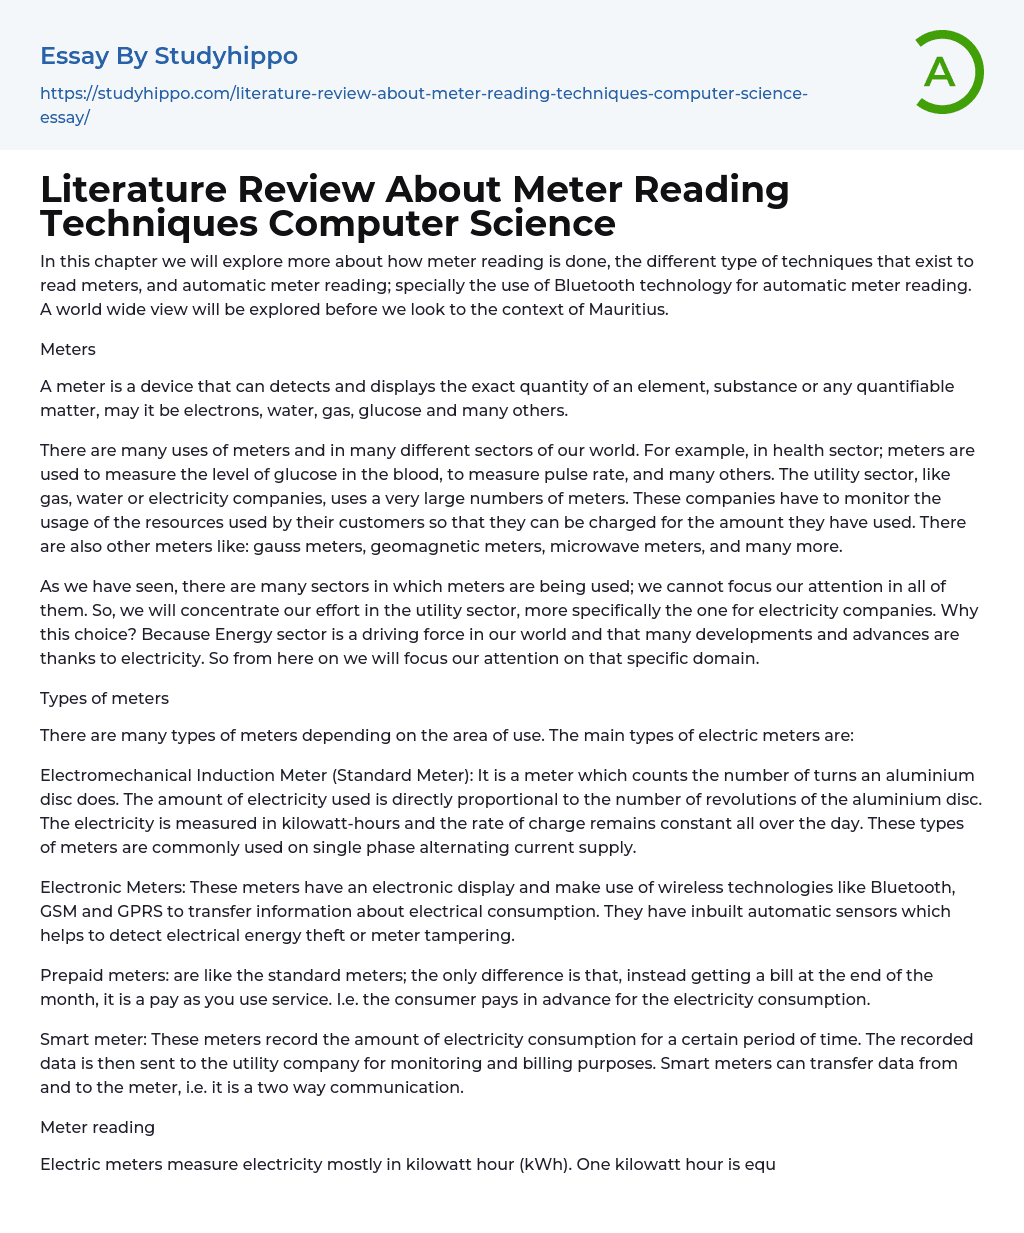 Literature Review About Meter Reading Techniques Computer Science Essay Example